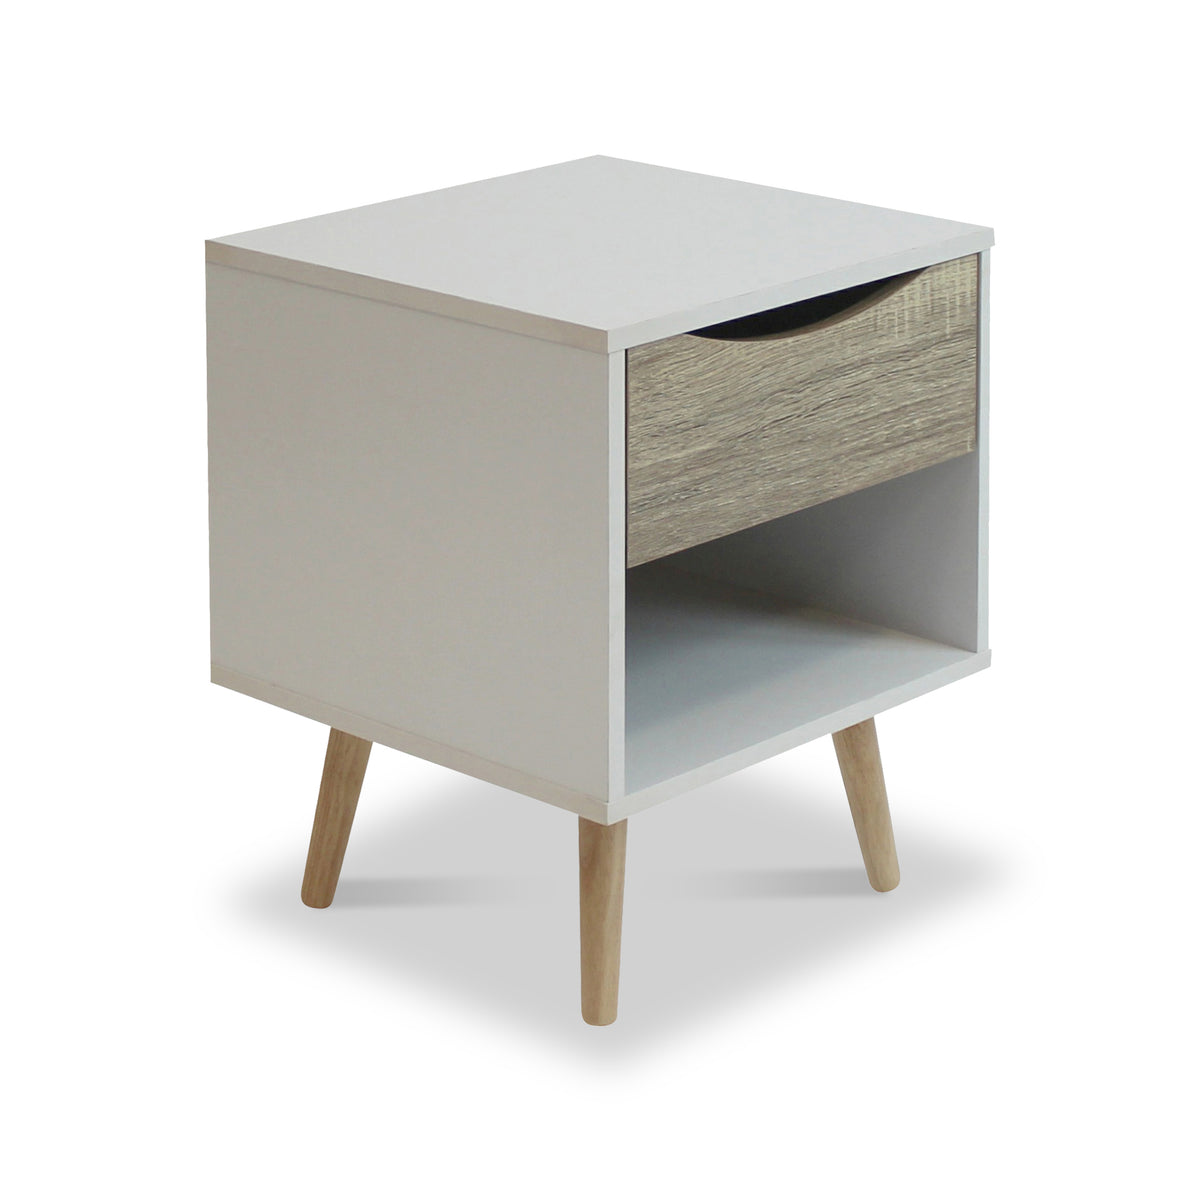 Antonio 1 Drawer Bedside Table by Roseland Furniture